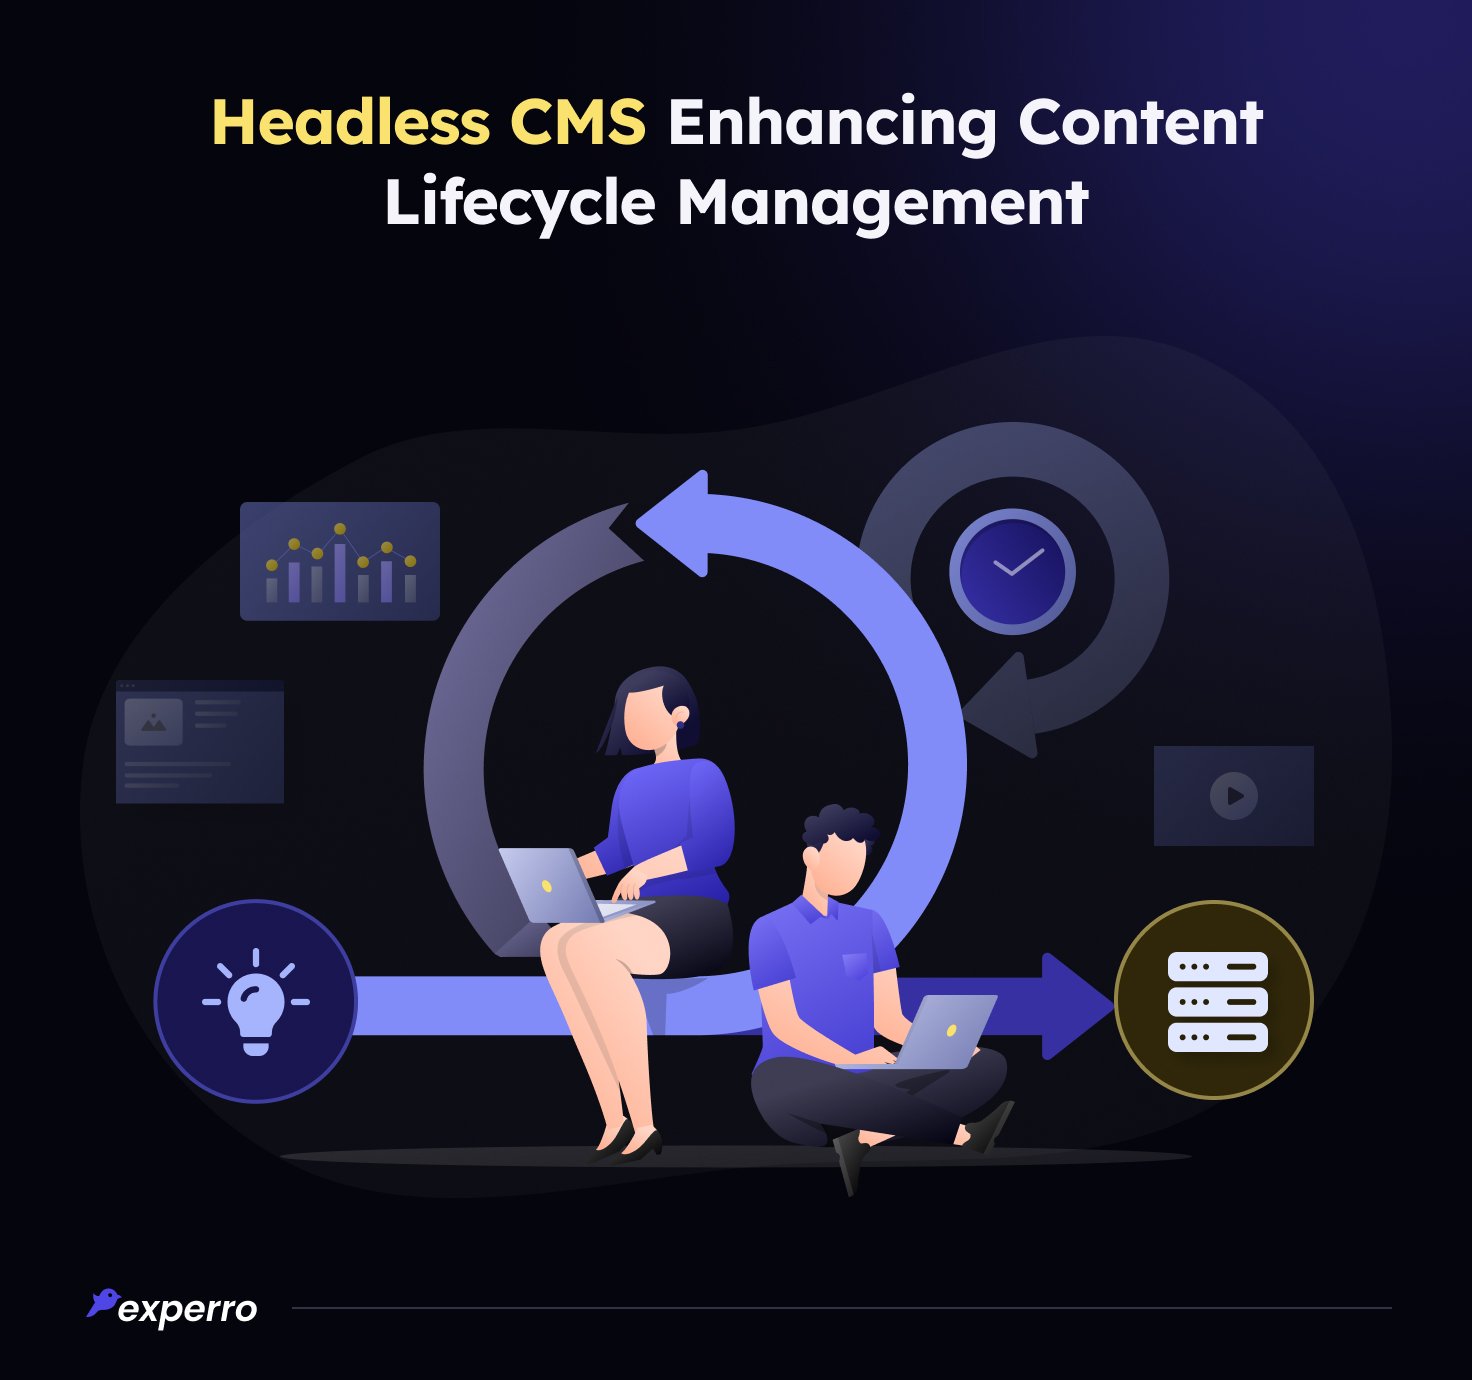 Enhance Content Lifecycle Management with Headless CMS